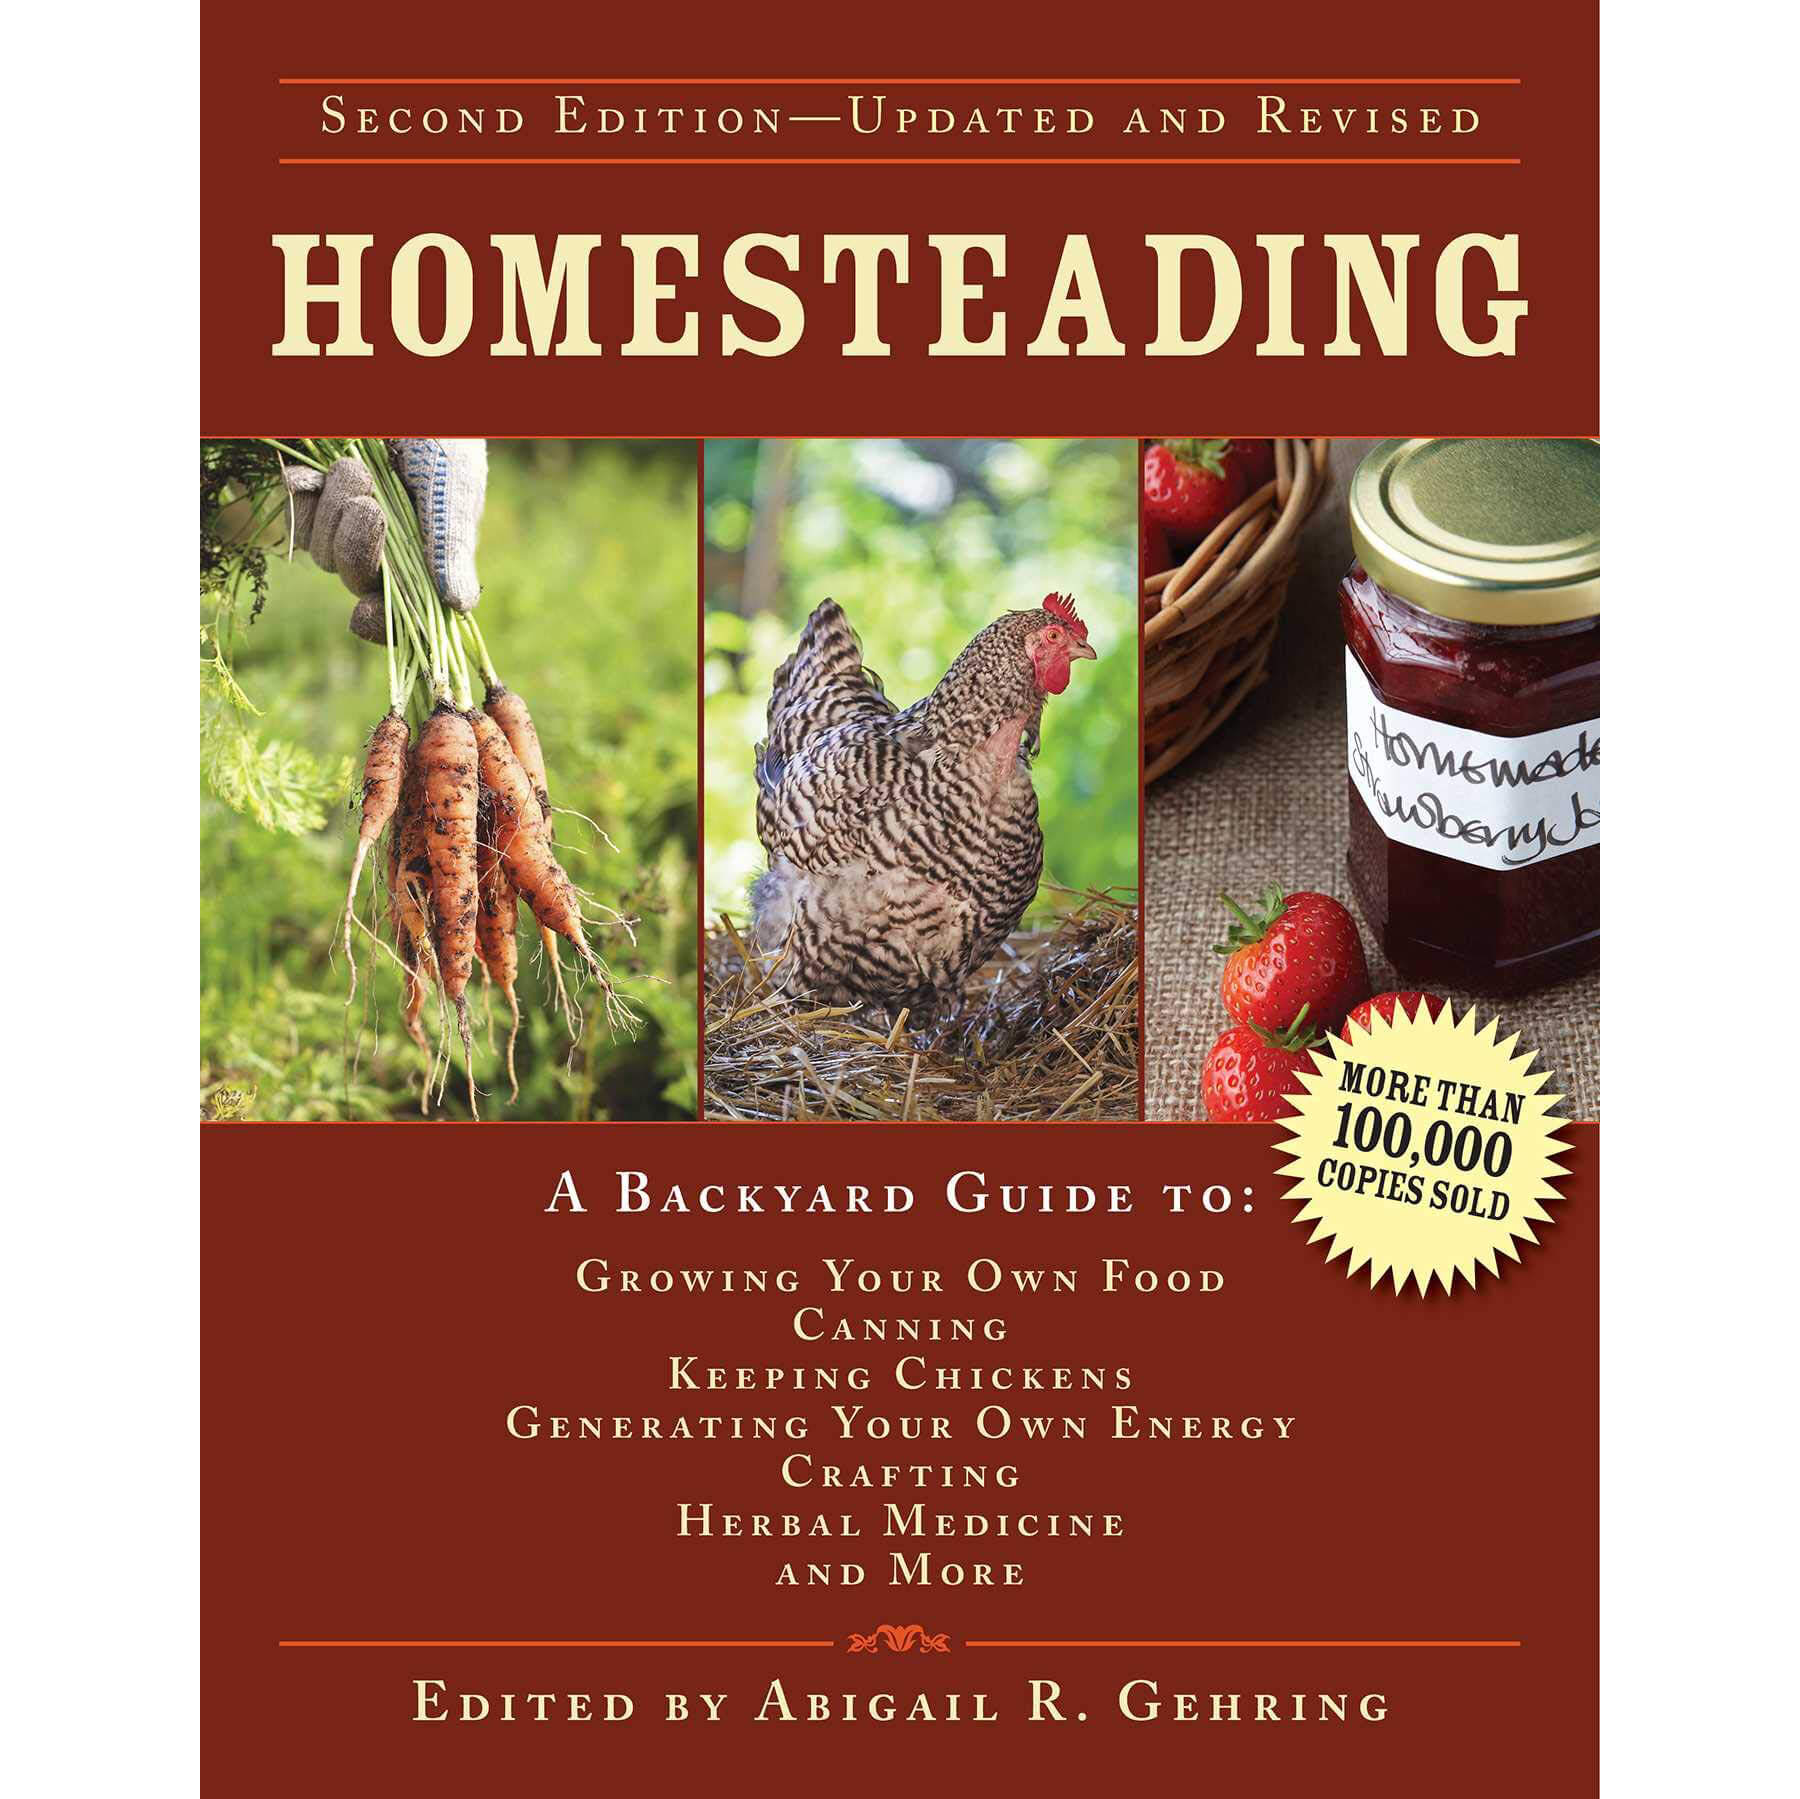 Homesteading: A Backyard Guide to Growing Your Own Food, Canning, Keeping Chickens, Generating Your Own Energy, Crafting, Herbal Medicine, and More front cover.